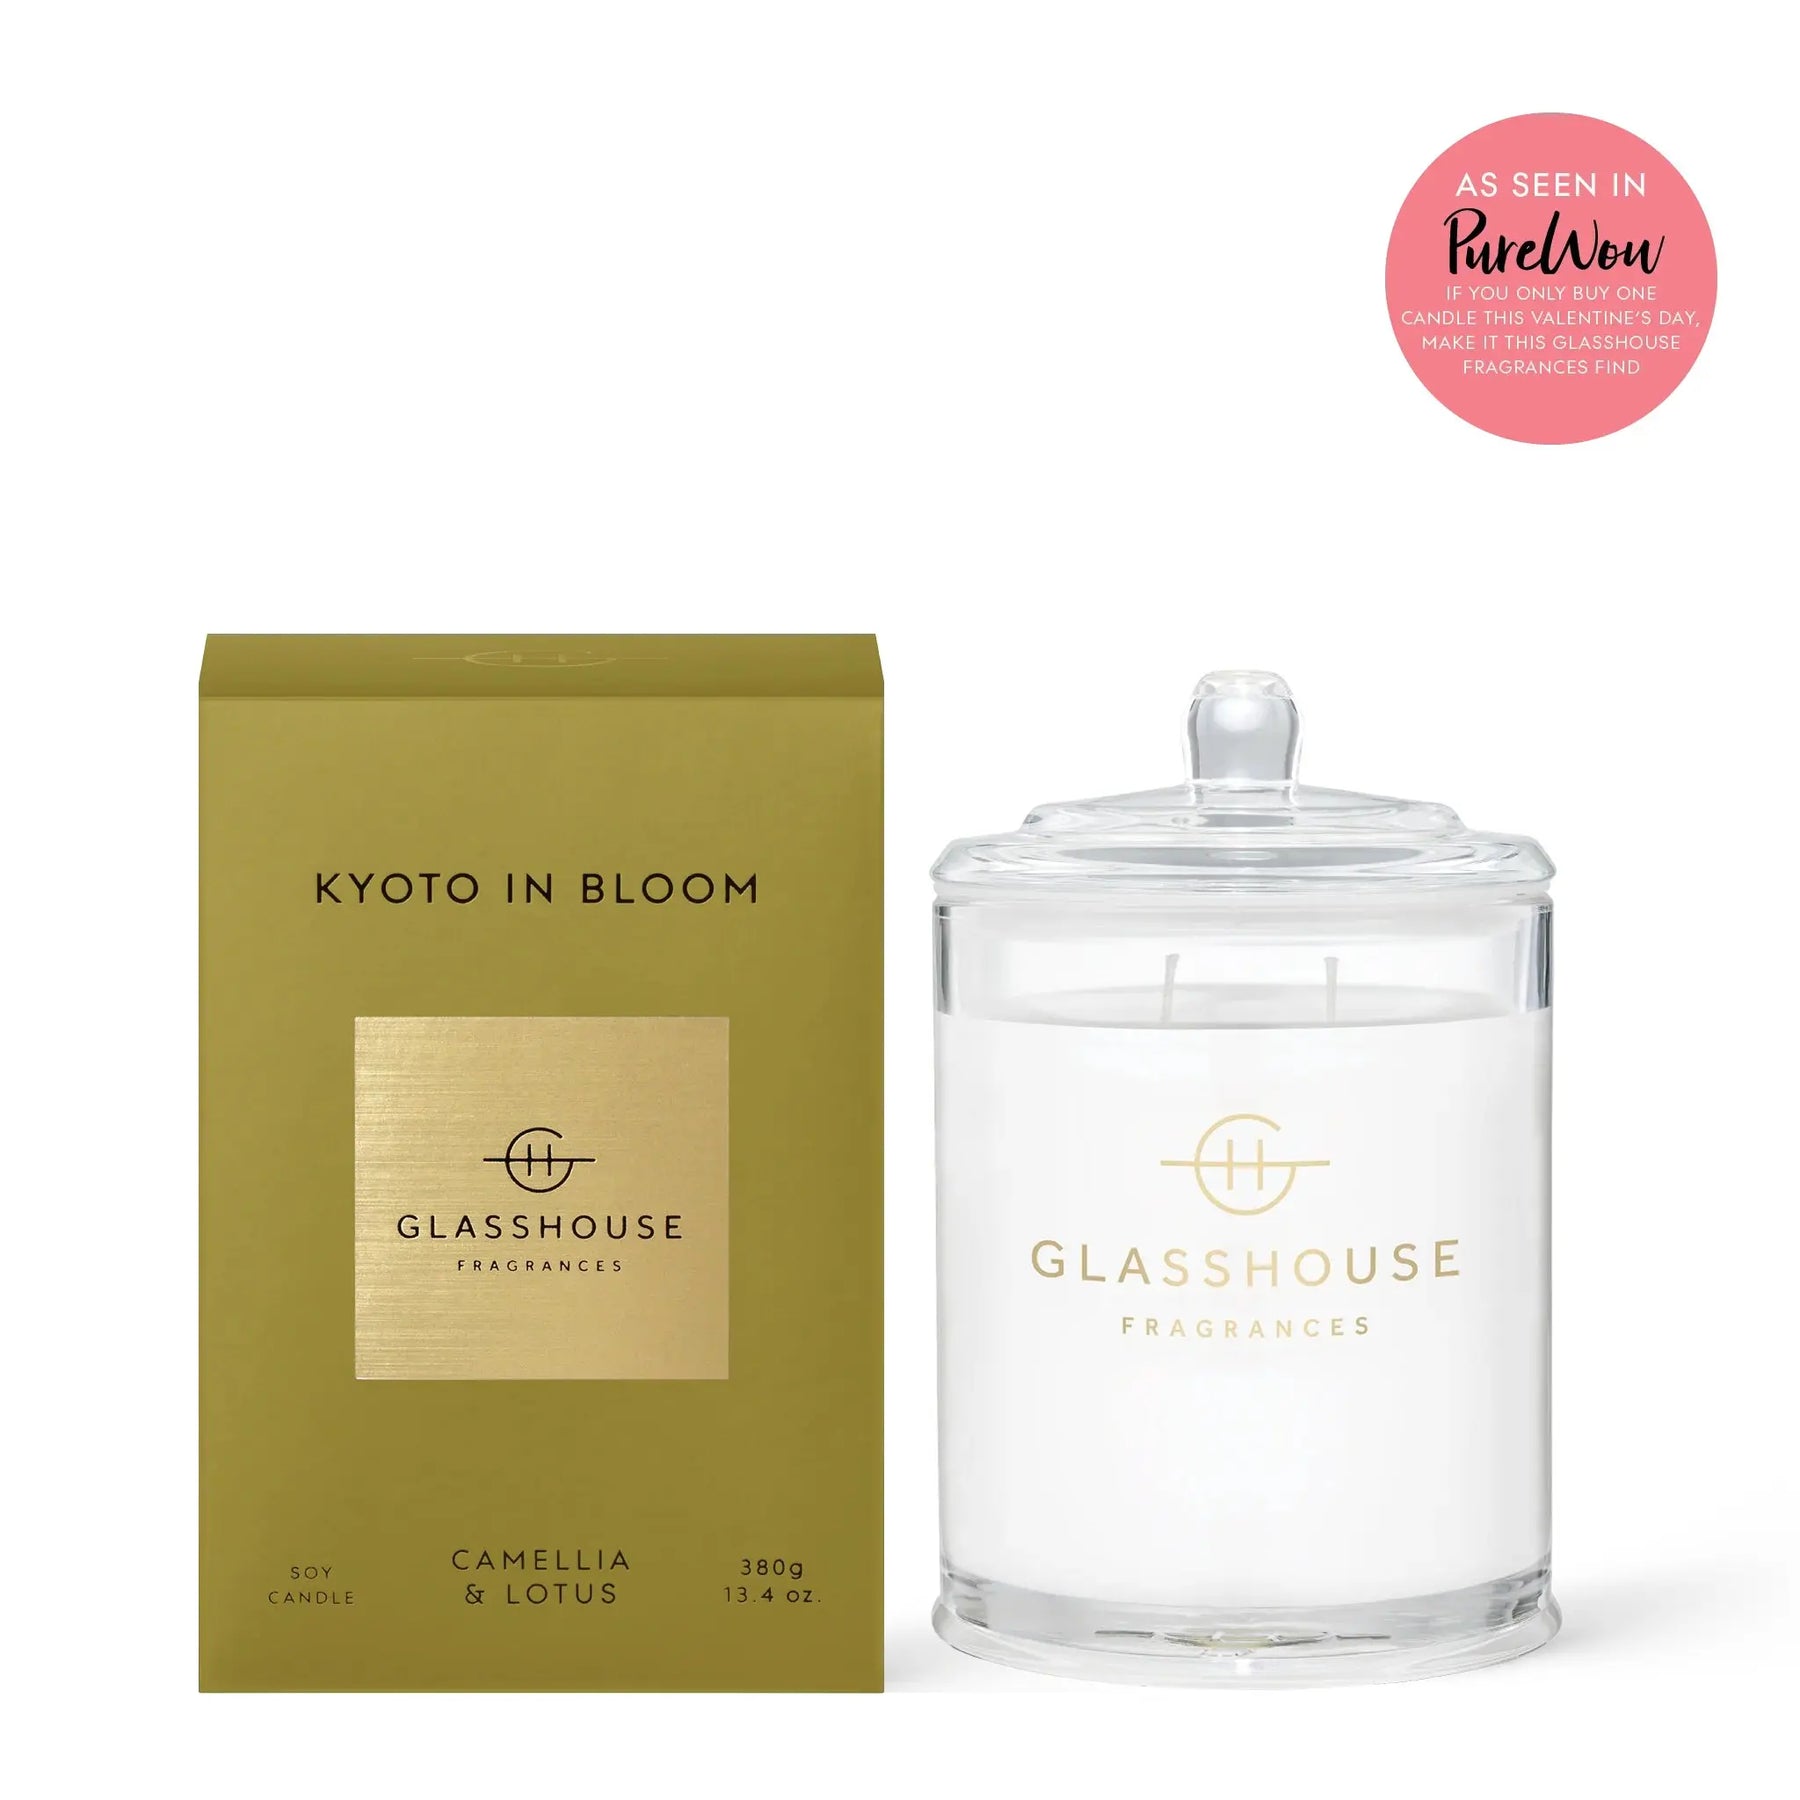 Glasshouse Fragrances Kyoto in Bloom Soy Candle Camellia and Lotus 380 grams 13.4 ounces